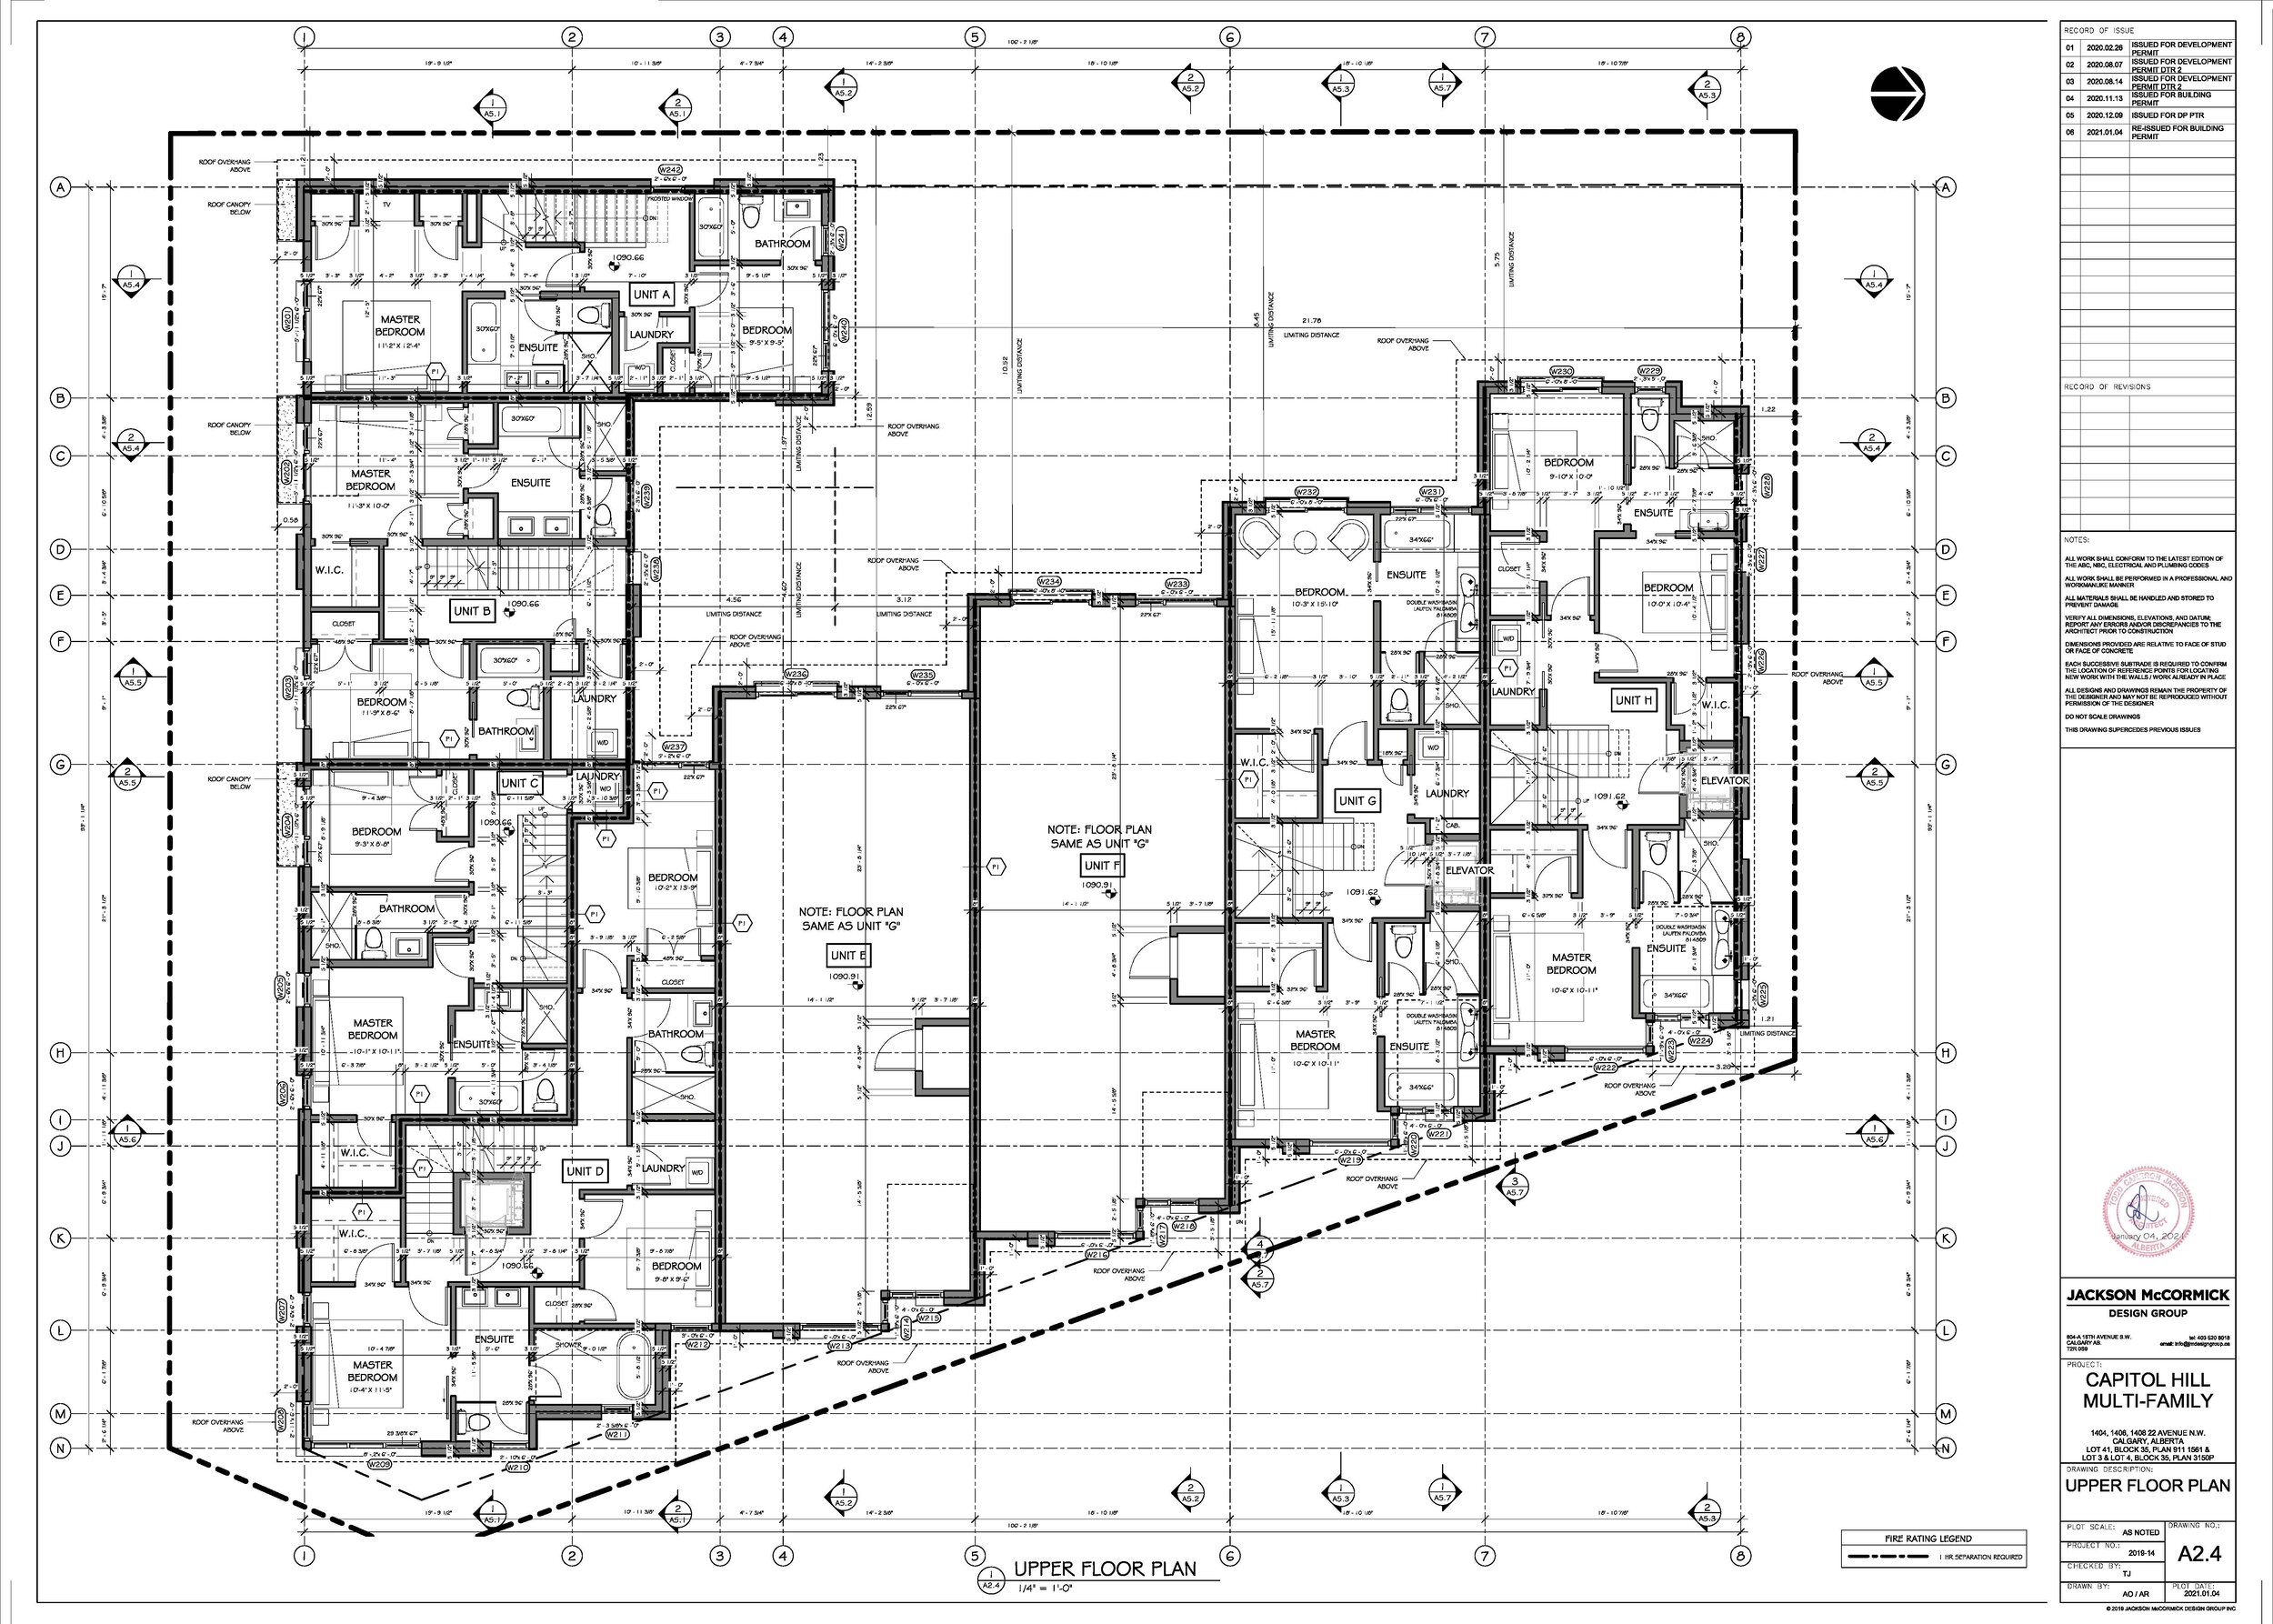 2021.01.04 - CAPITOL HILL MULTI-FAMILY - ARCH BP DRAWINGS_Page_10.jpg